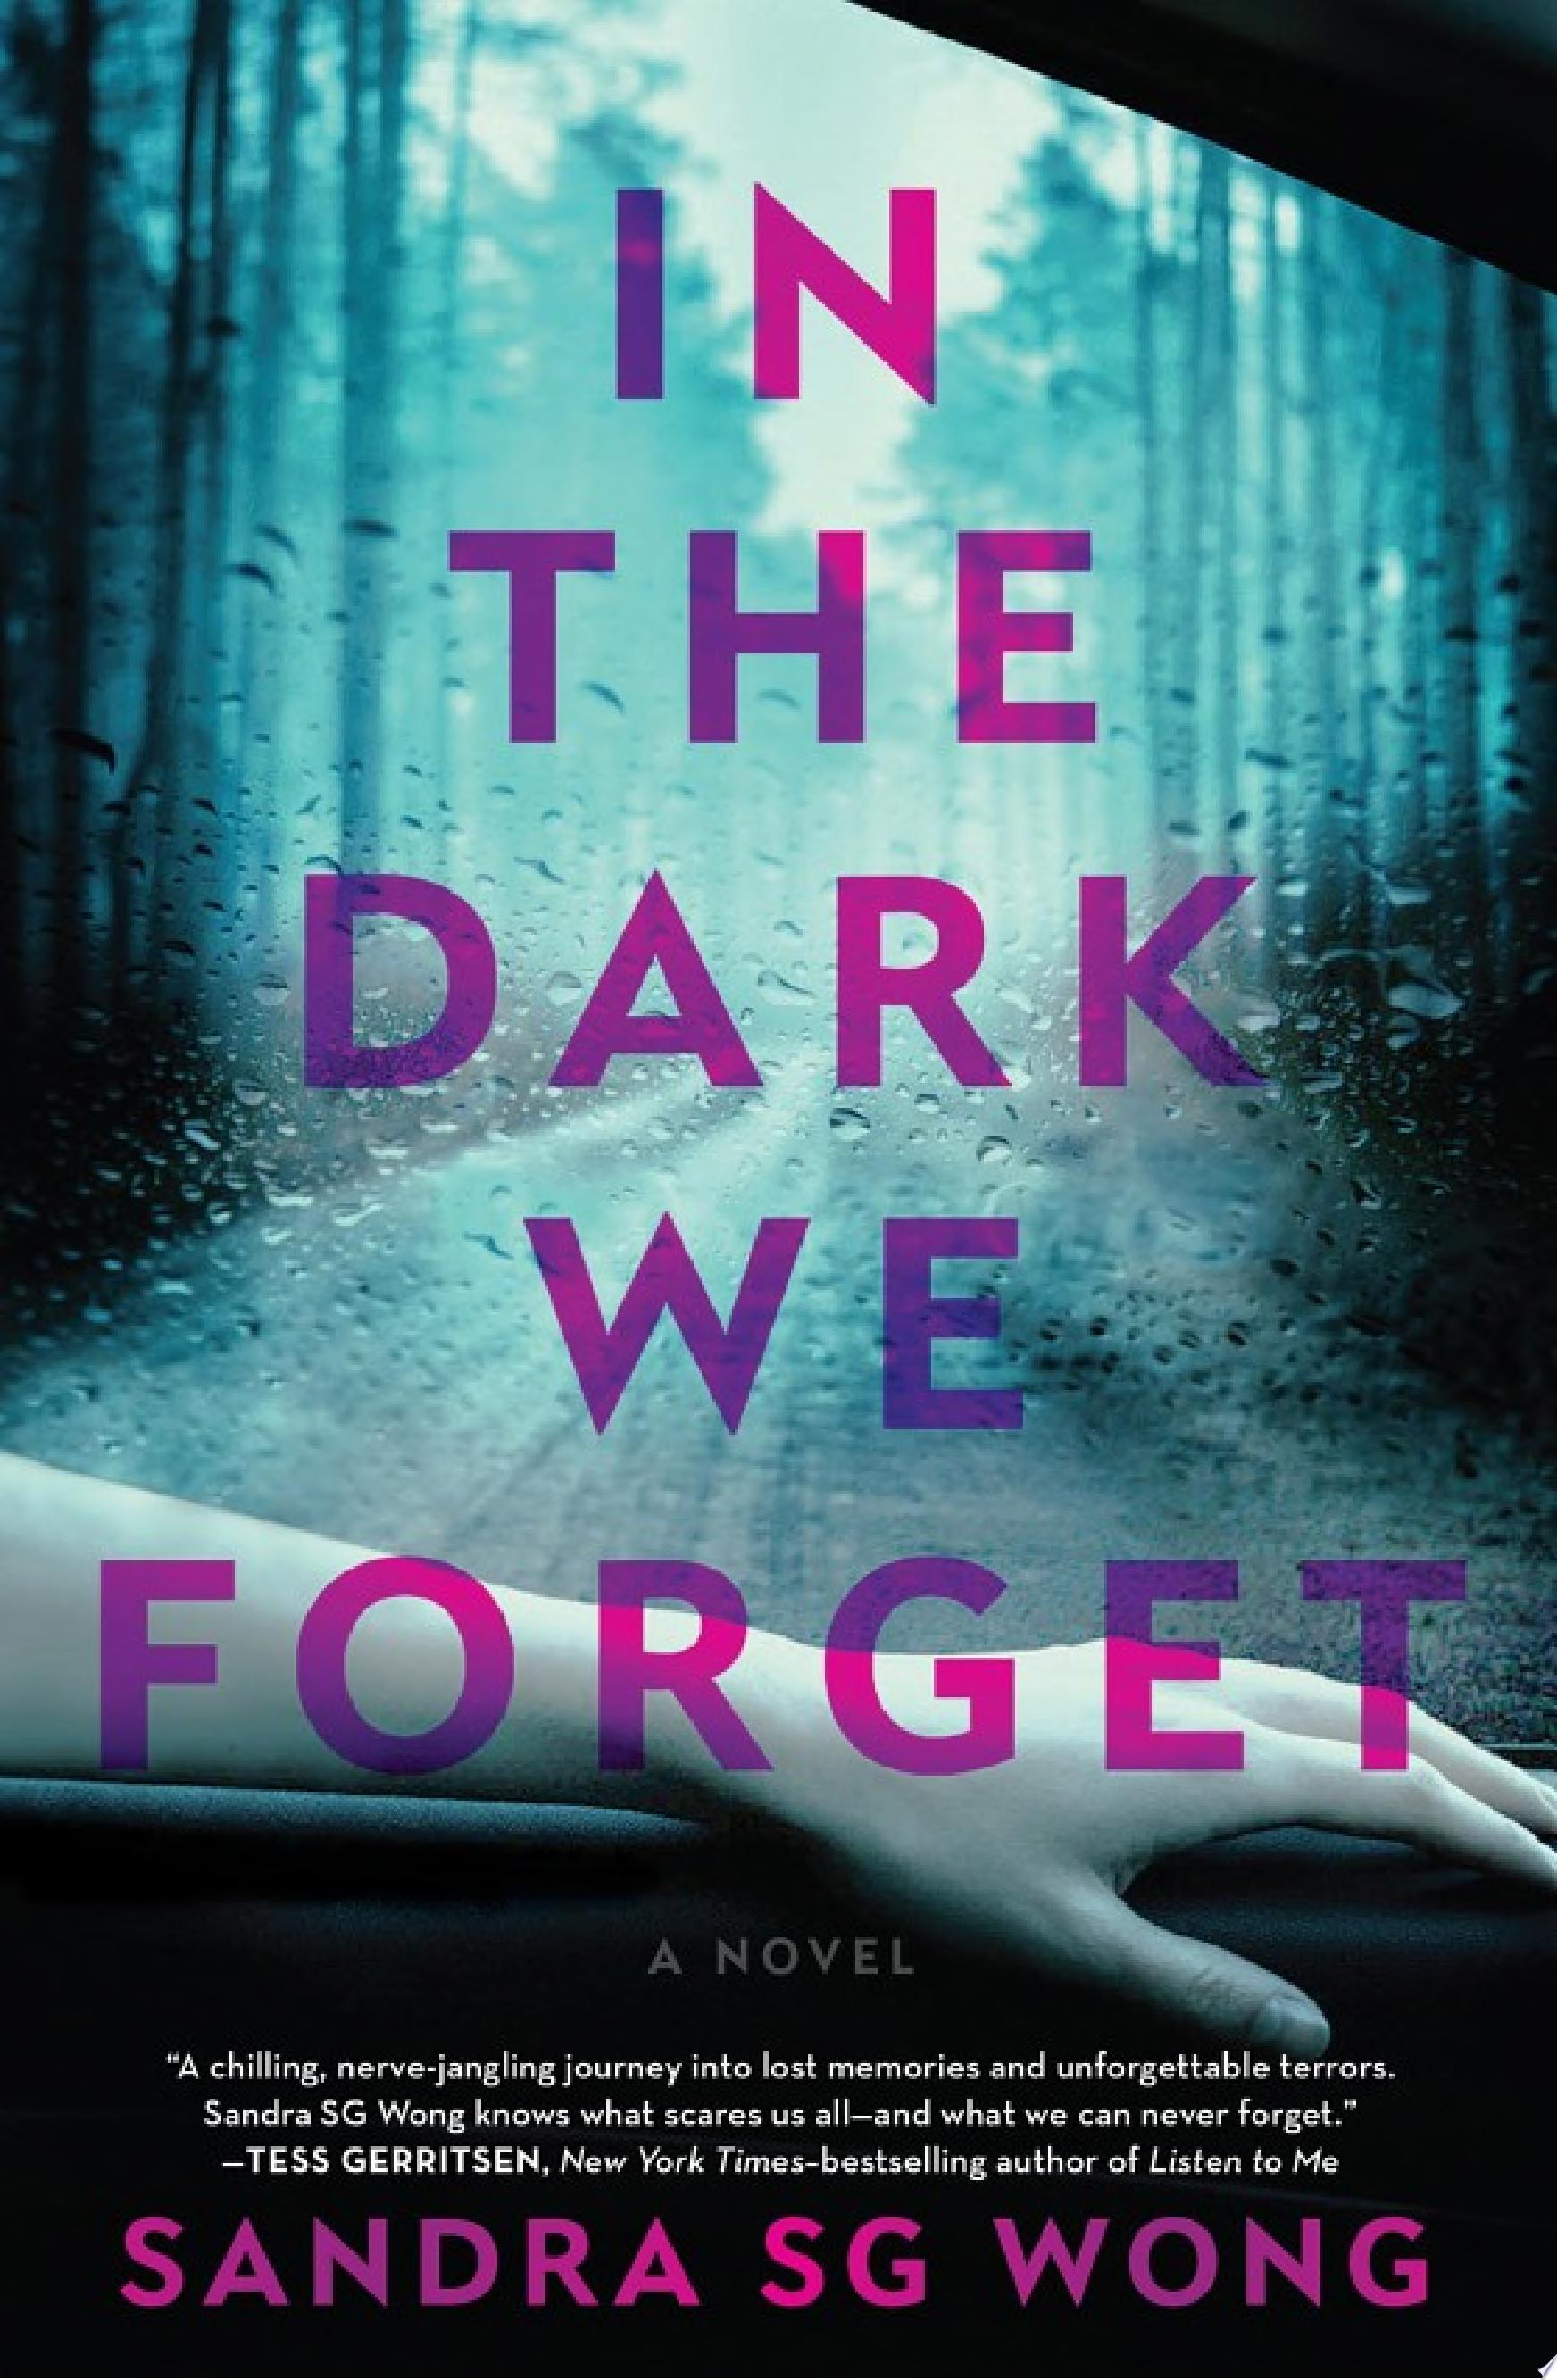 Image for "In the Dark We Forget"